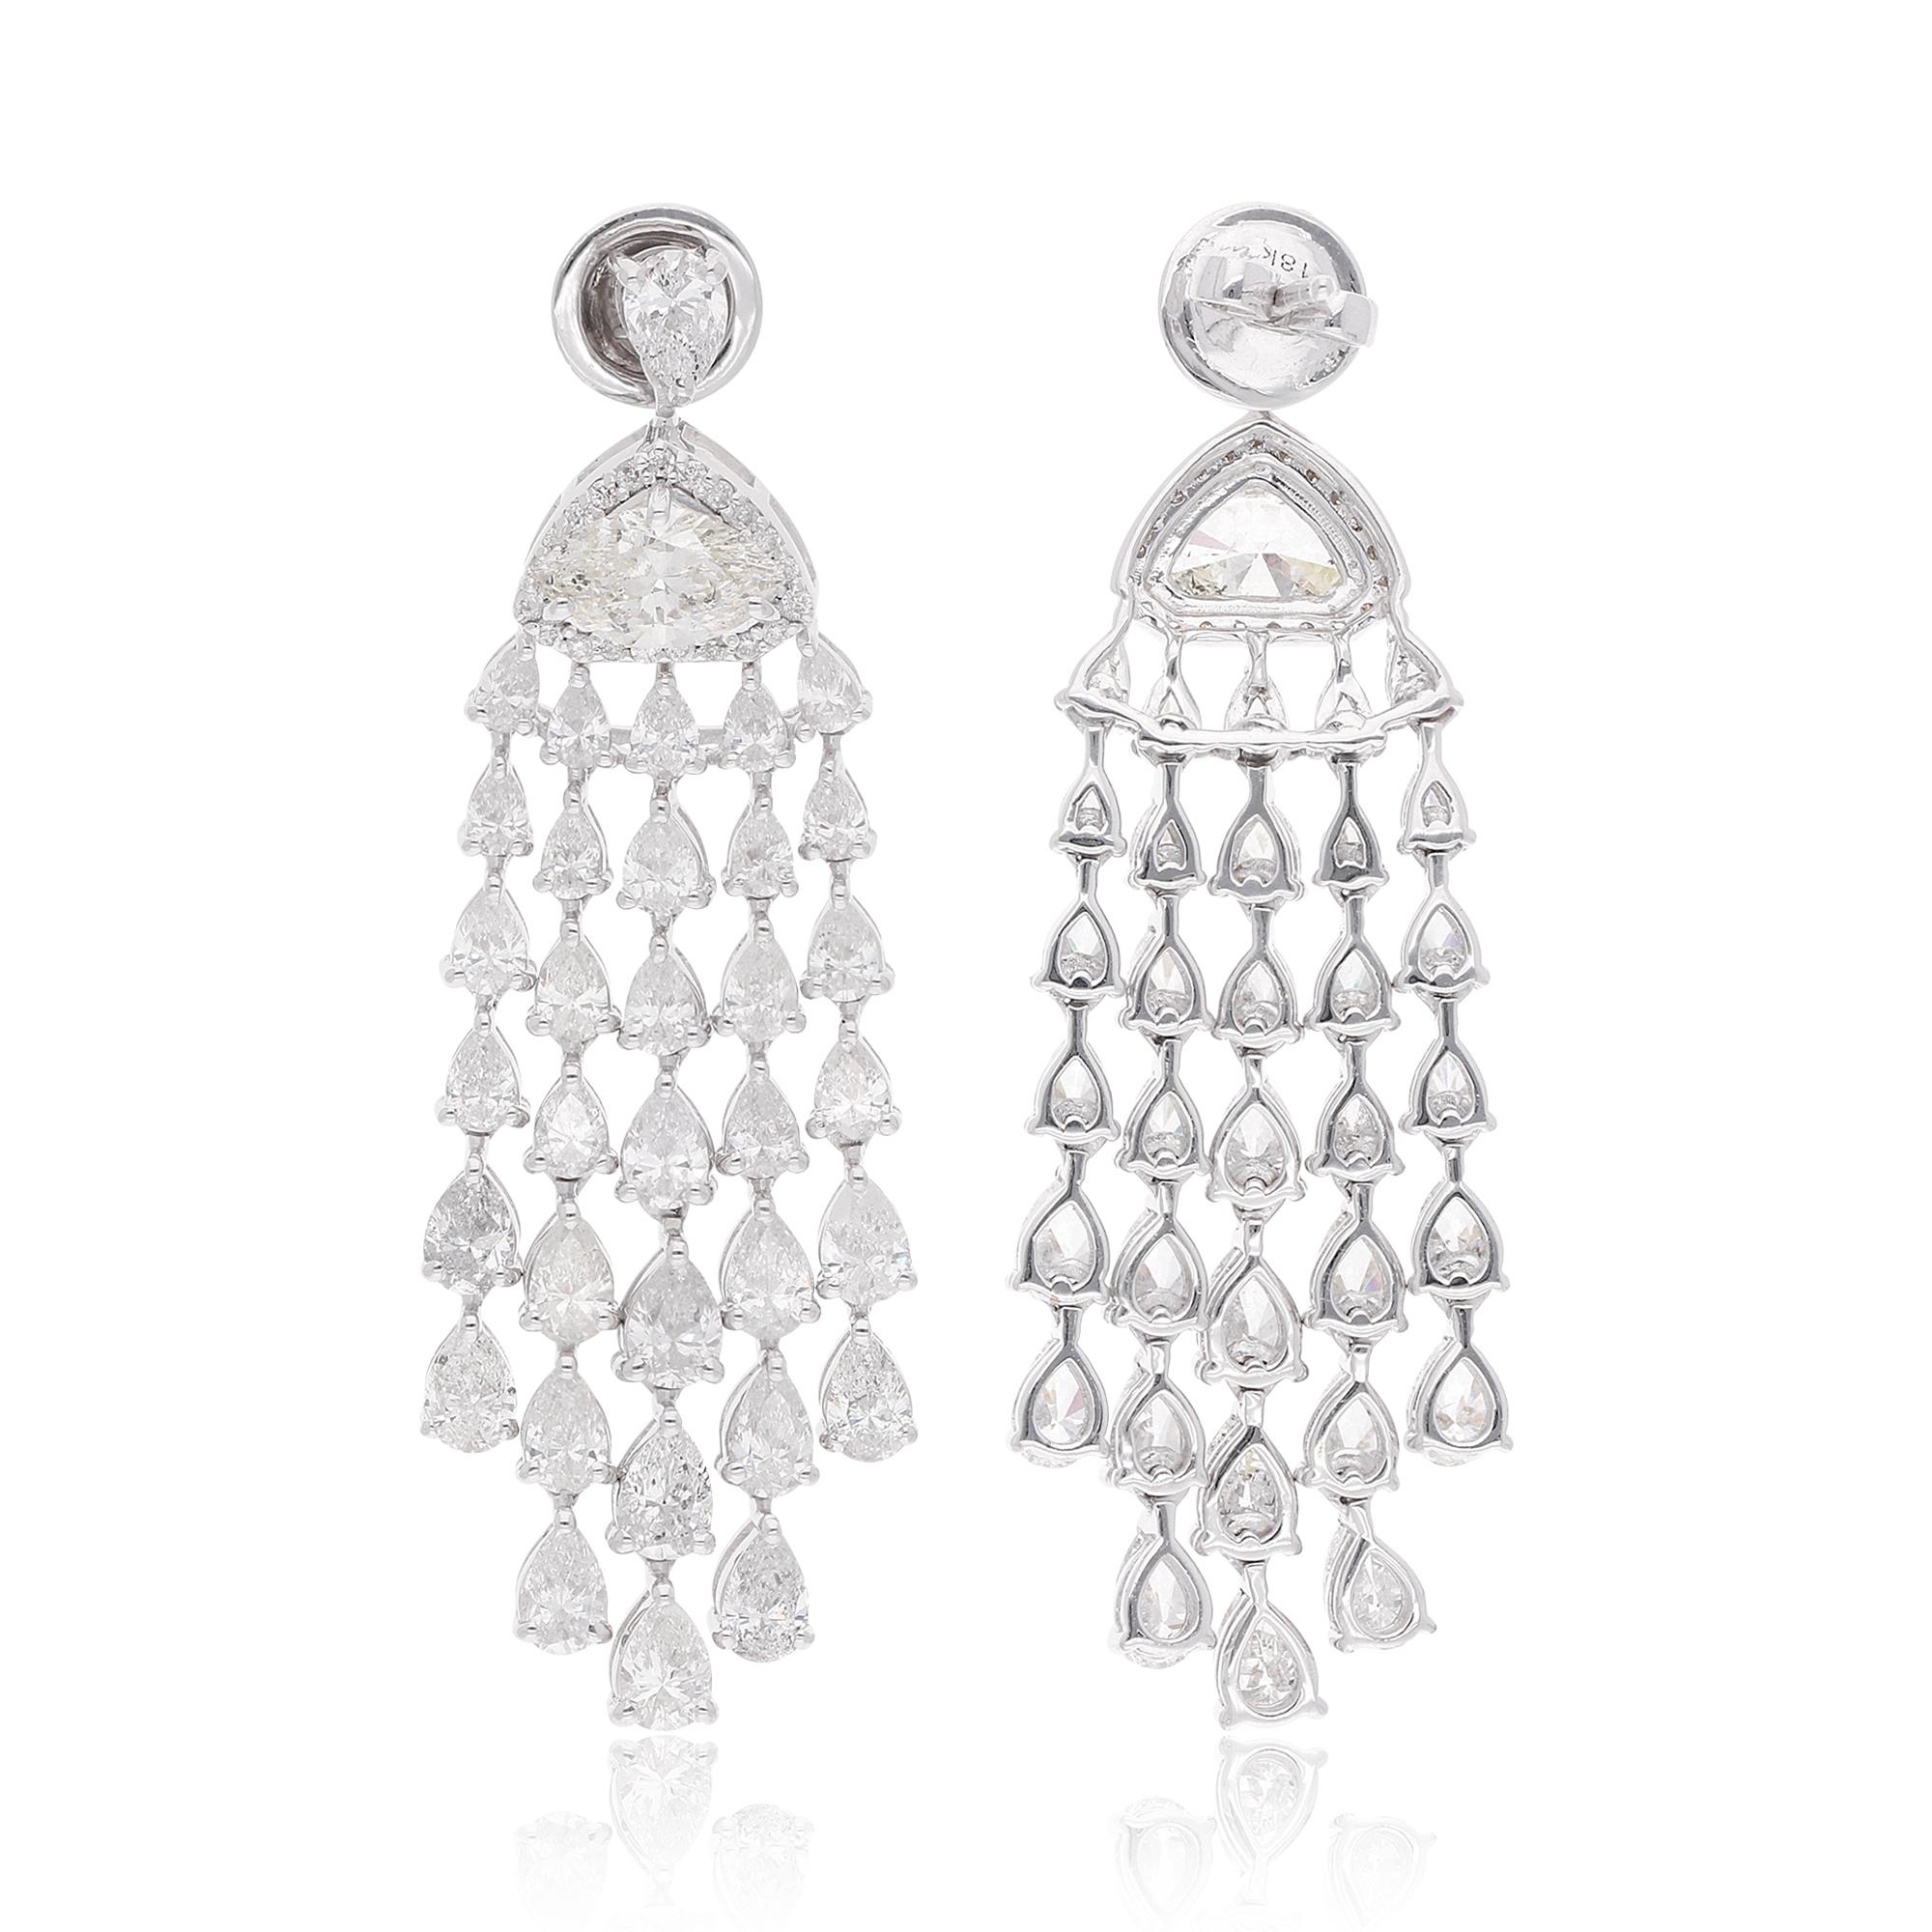 These Diamond Chandelier Earrings with 8.62 ct. Genuine Diamonds are a promise of perfection and purity. These earrings are set in 18k Solid White Gold. You can choose these earrings in 10k/14k/18k, Rose Gold/Yellow Gold/White Gold.

These are a